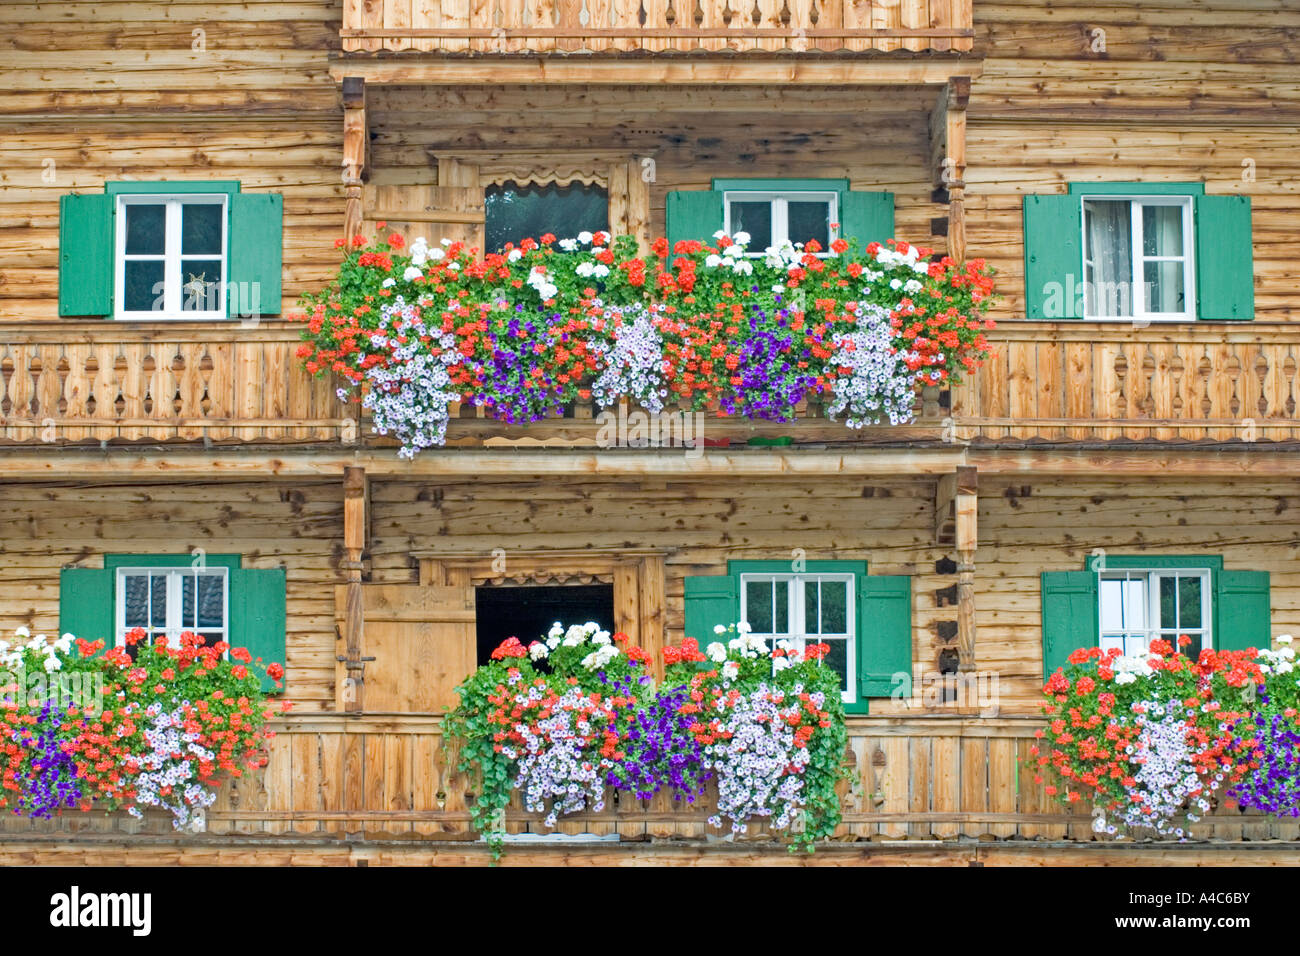 Well-filled flower boxes decorate the guesthouse Huberwirt in the village of Oberaurach near Kitzbuehl, Tyrol, Austria Stock Photo